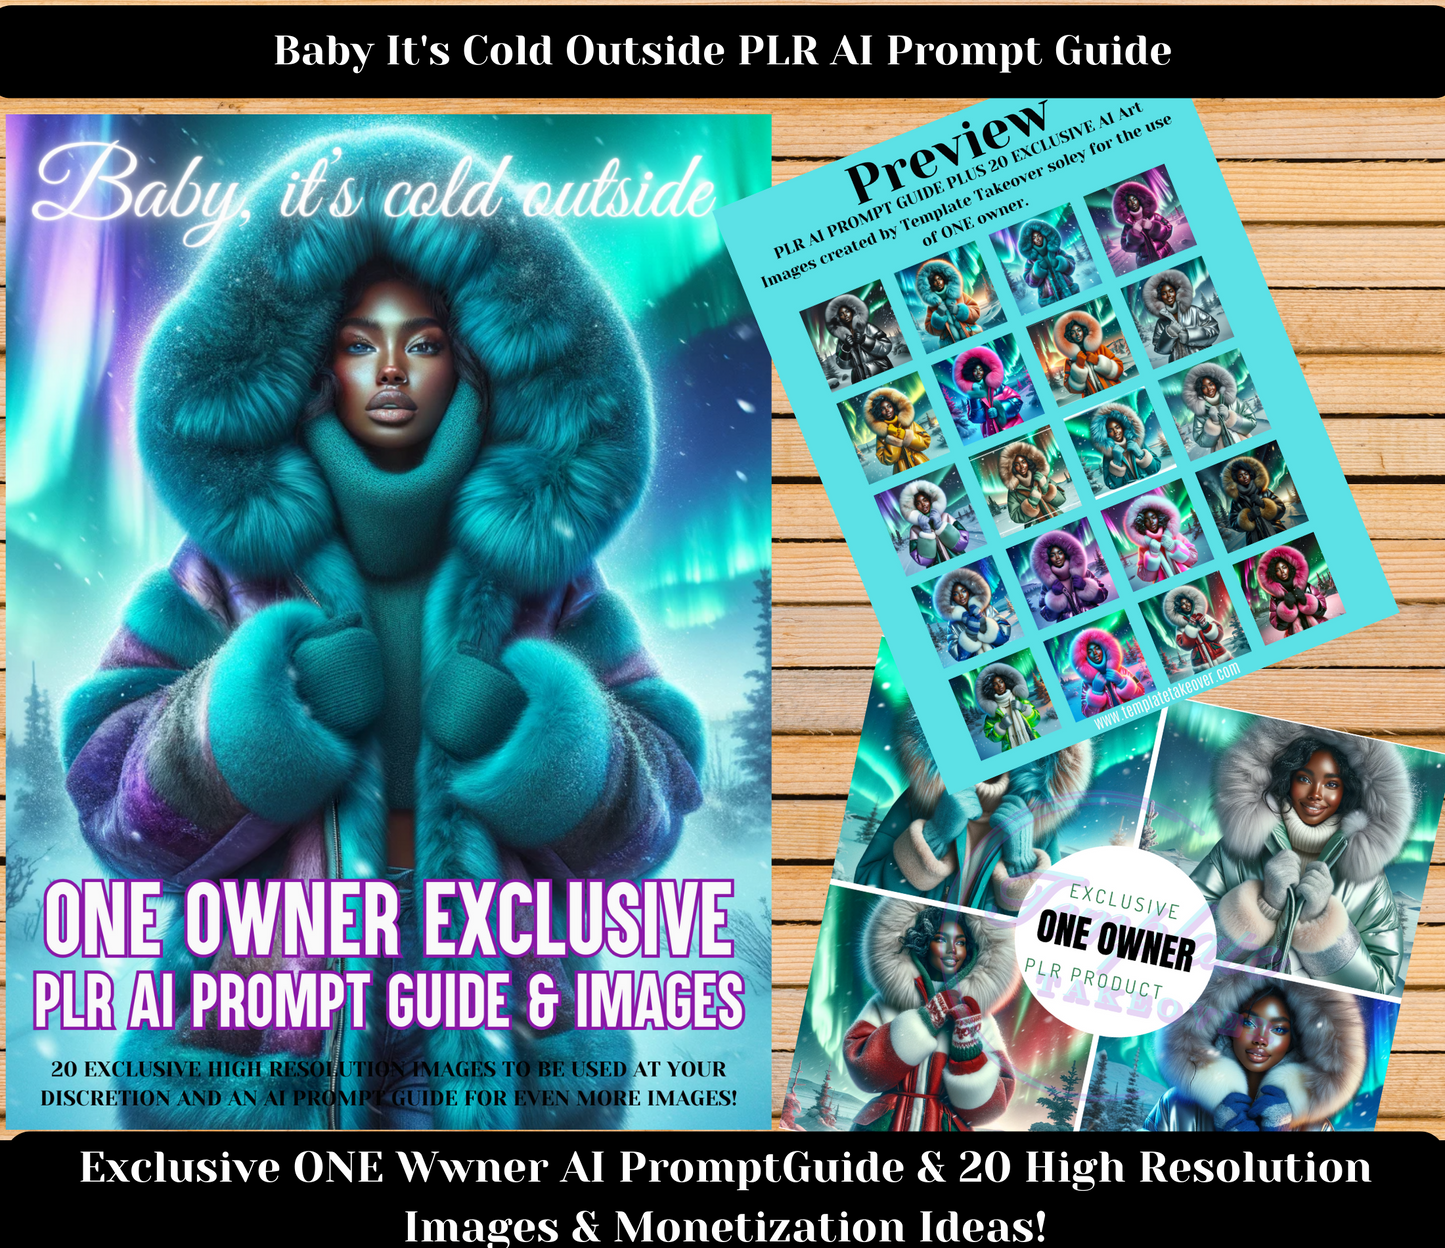 Baby It's Cold Outside PLR AI Prompt Guide